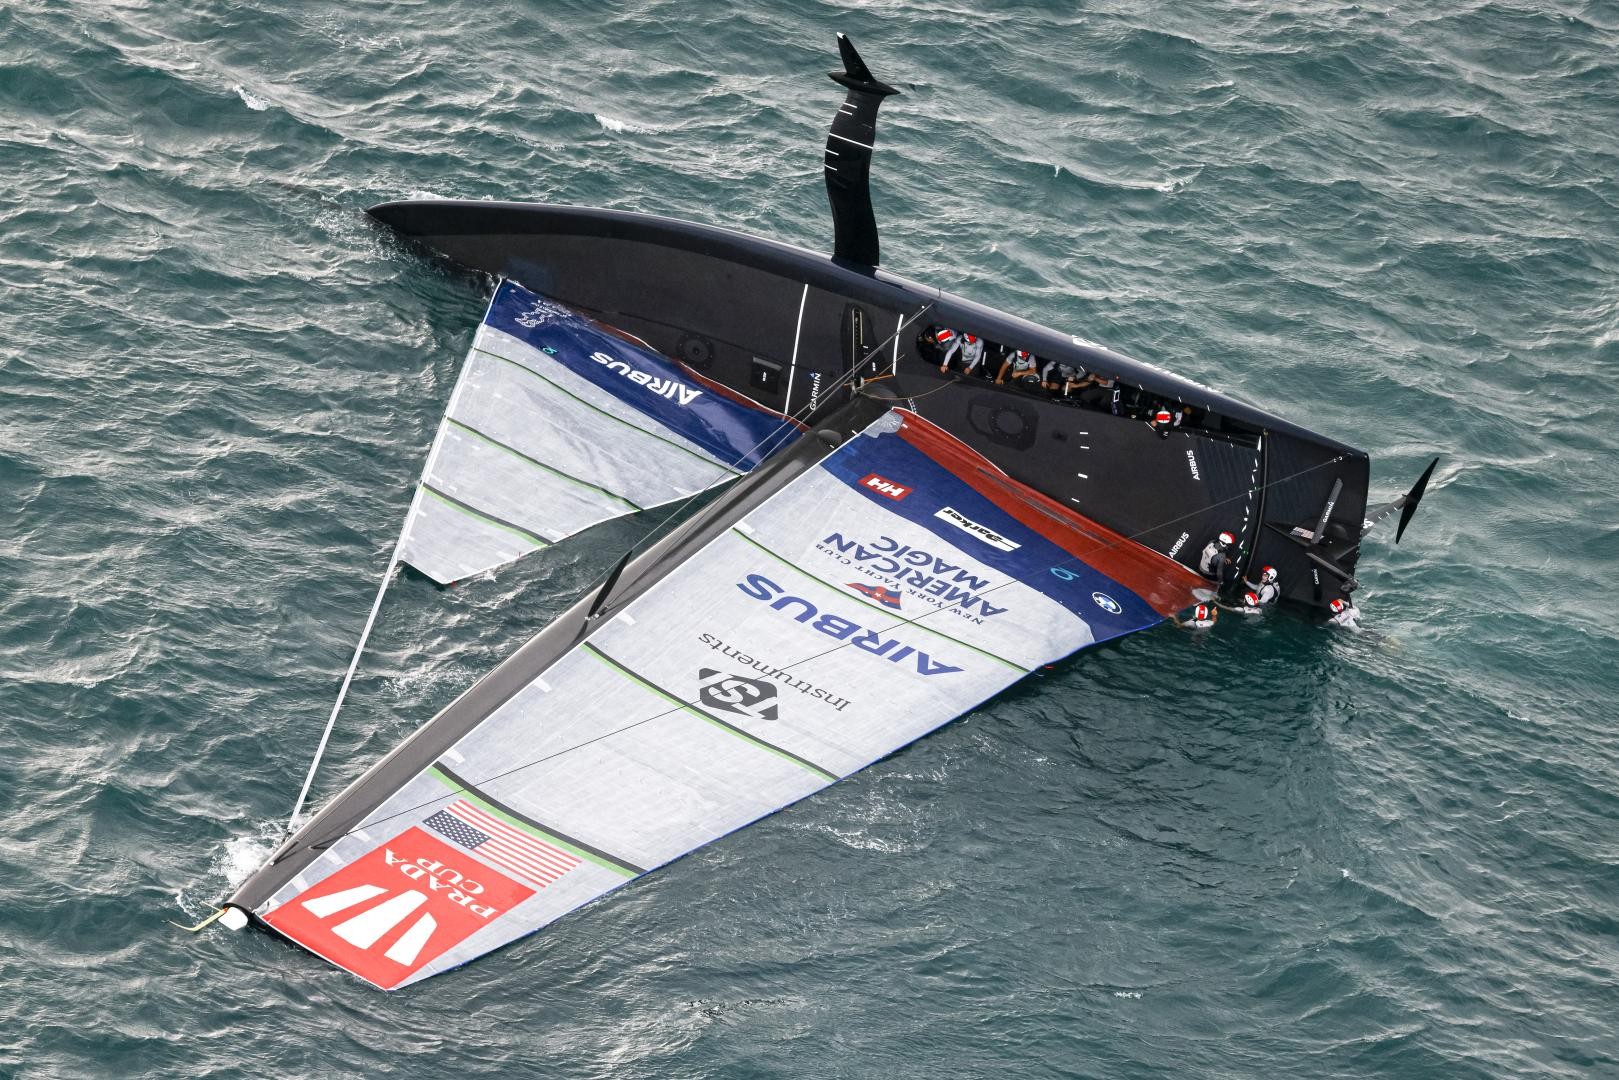 America’s Cup Event Ltd have activated emergency management plans